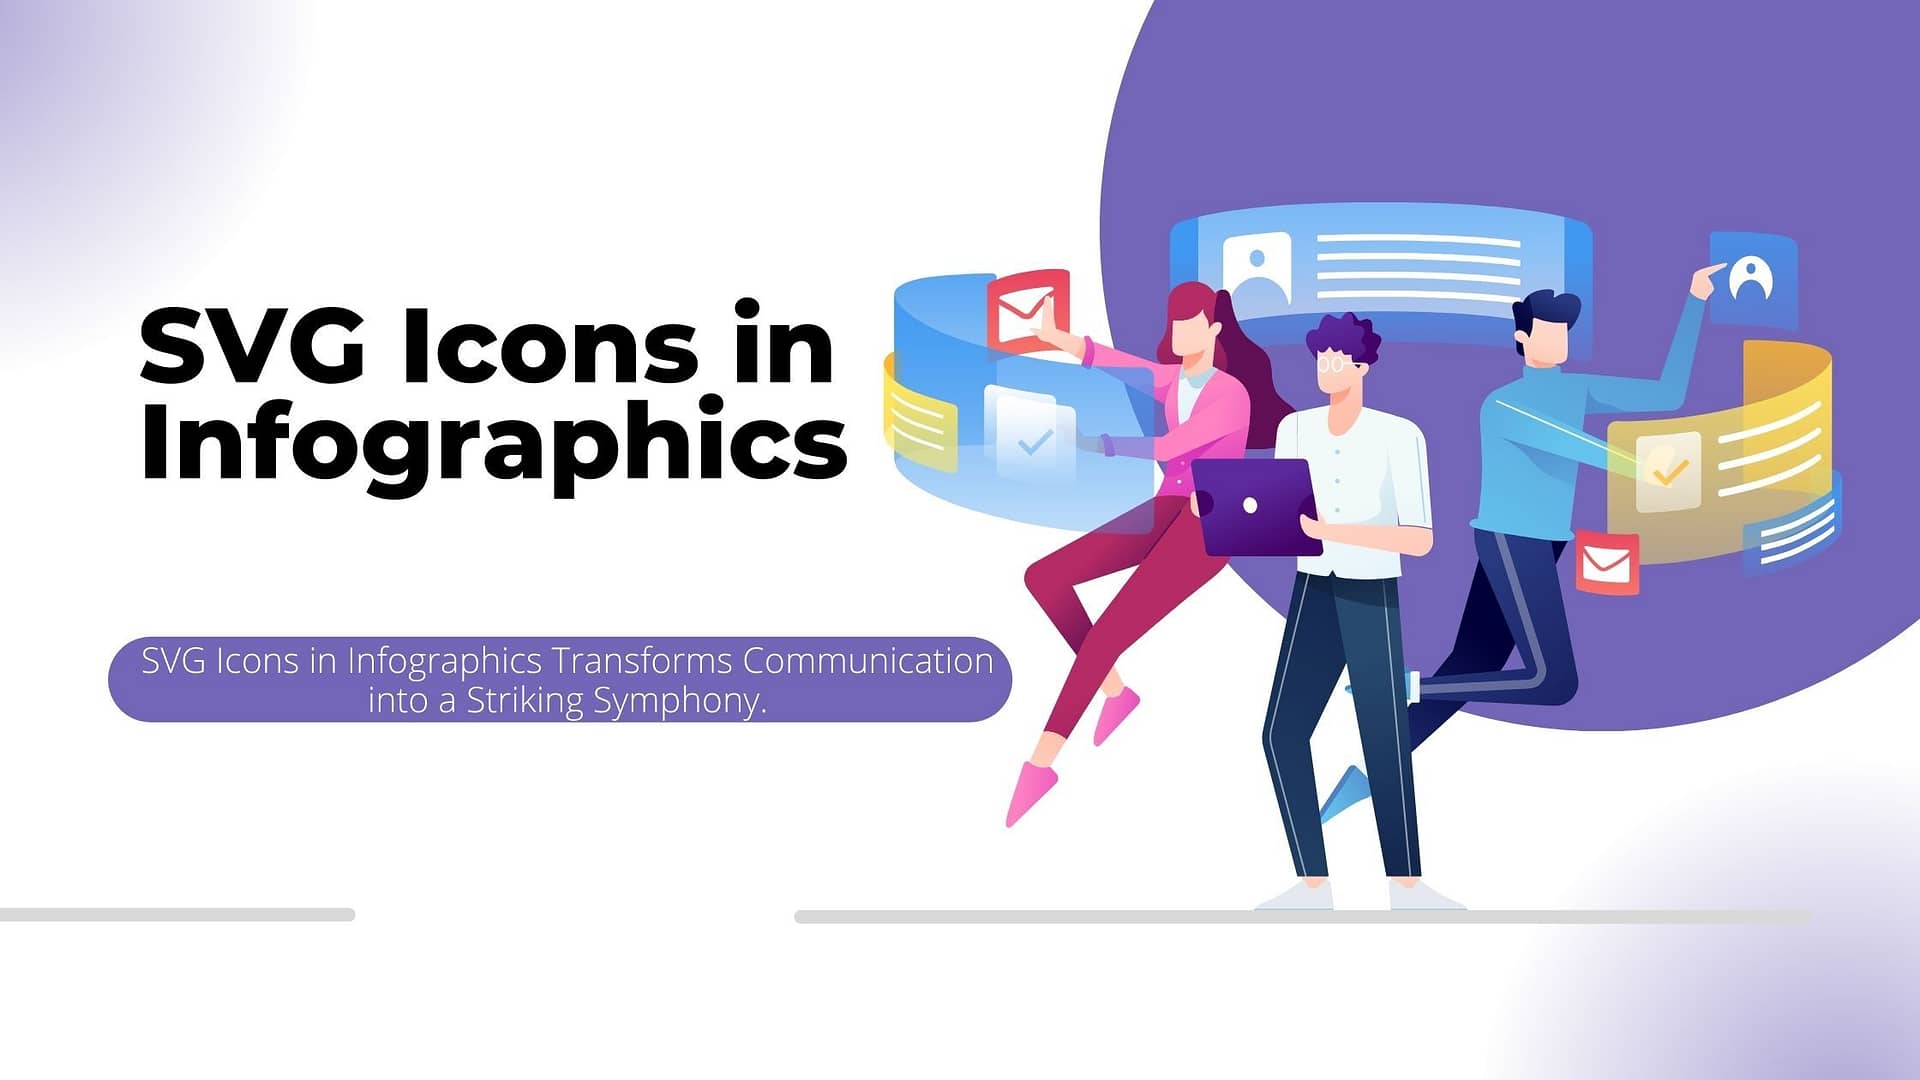 SVG Icons in Infographics 
